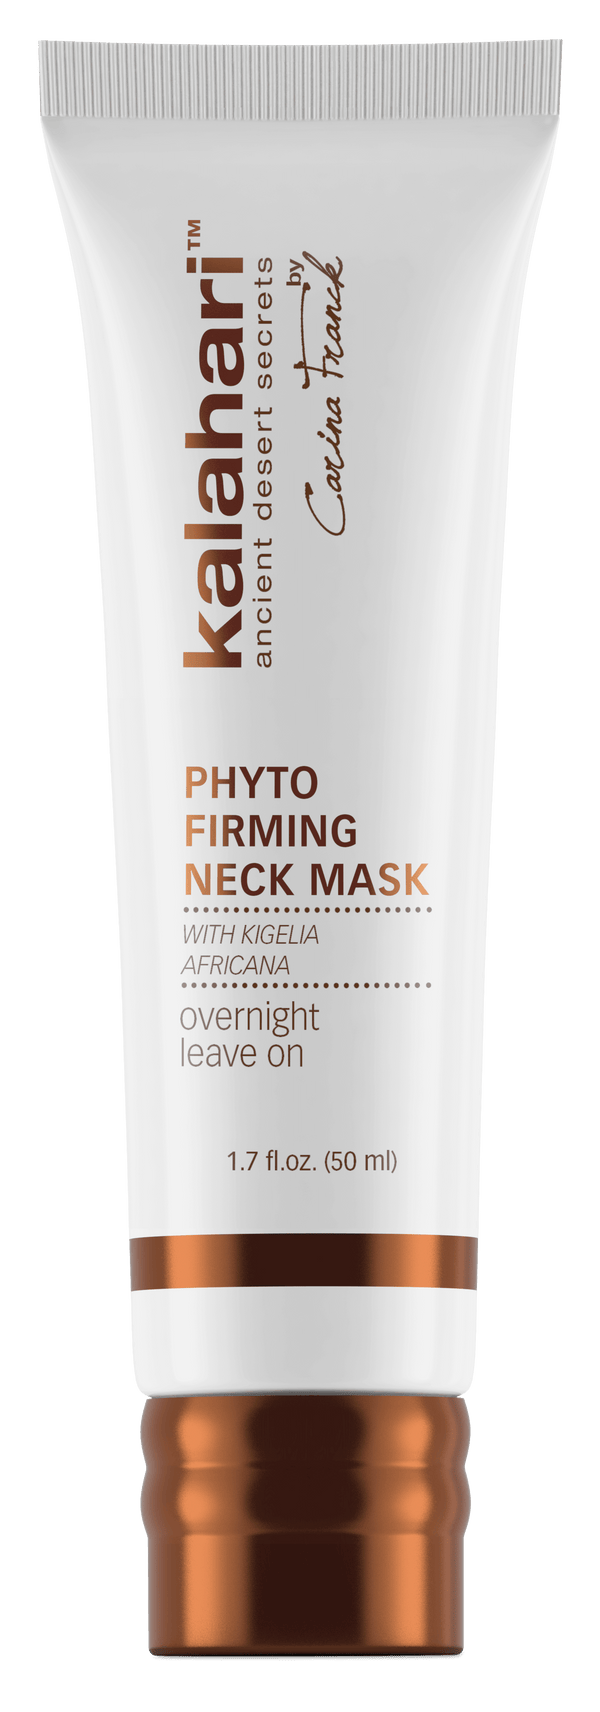 Phyto firming neck mask